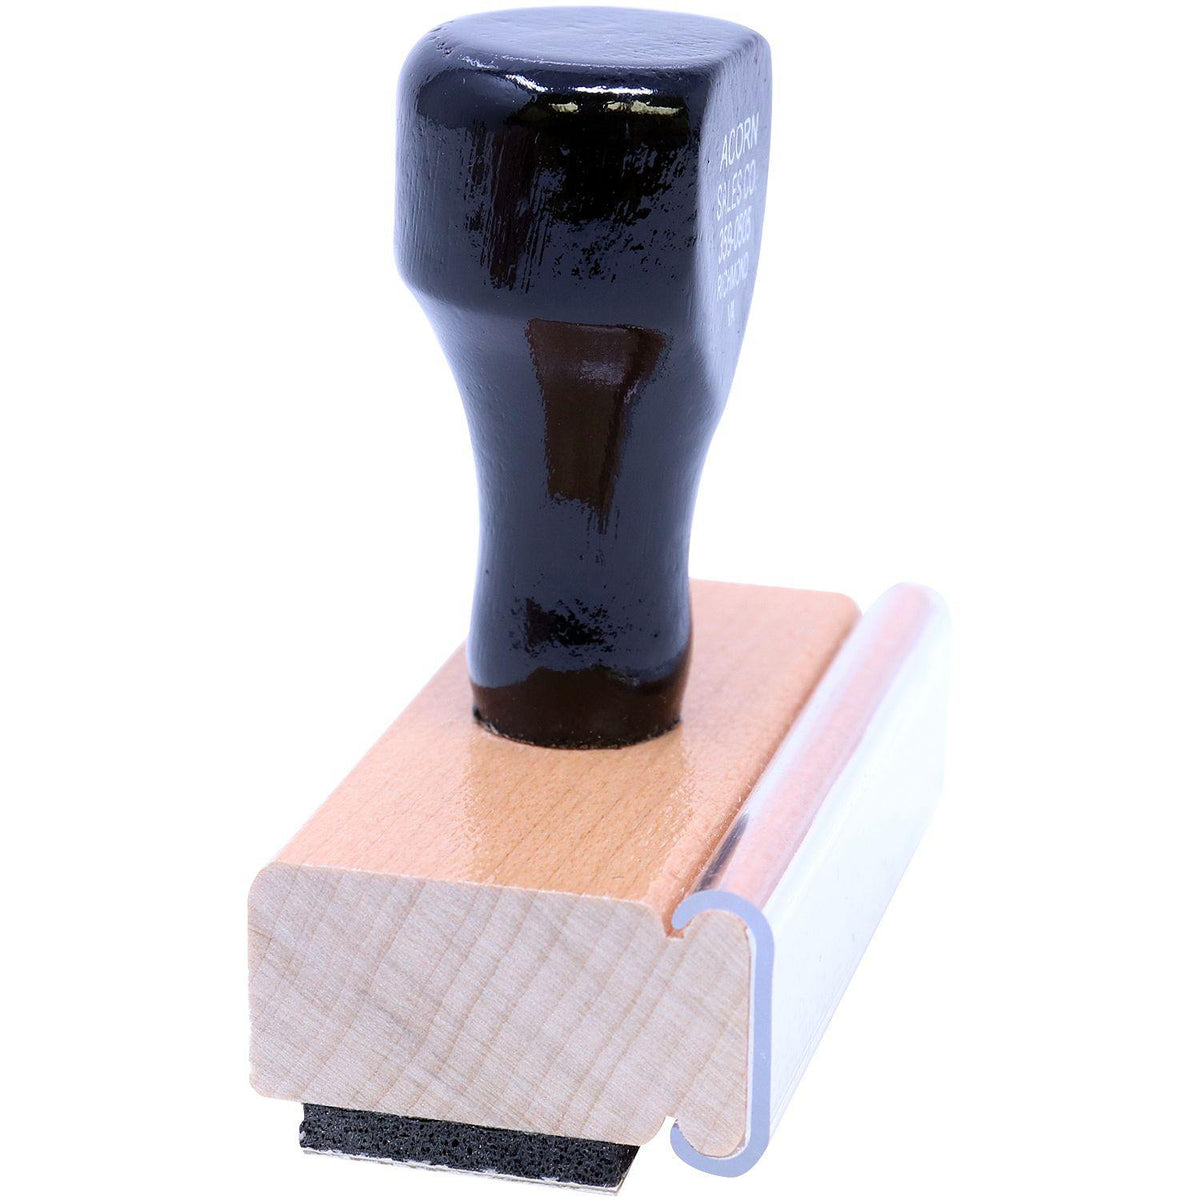 Side View of Large Paid with Date Line Rubber Stamp at an Angle